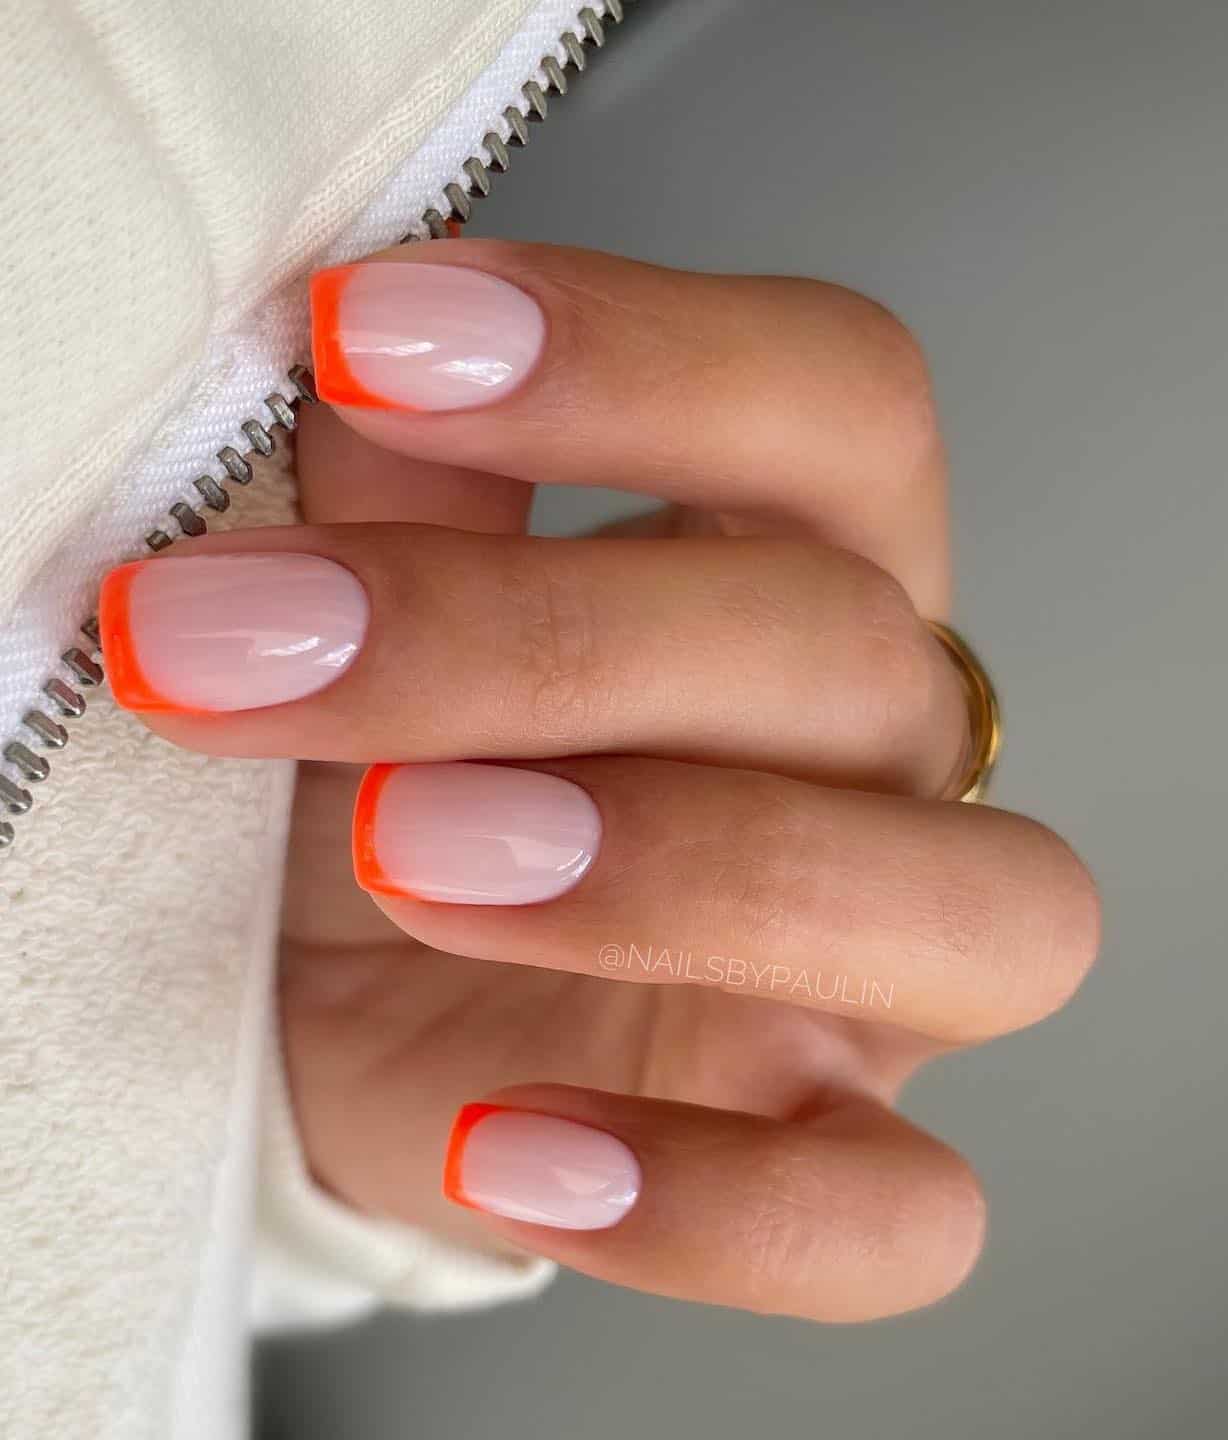 A hand with short square nails painted a pinkish nude tone with bright orange French tips